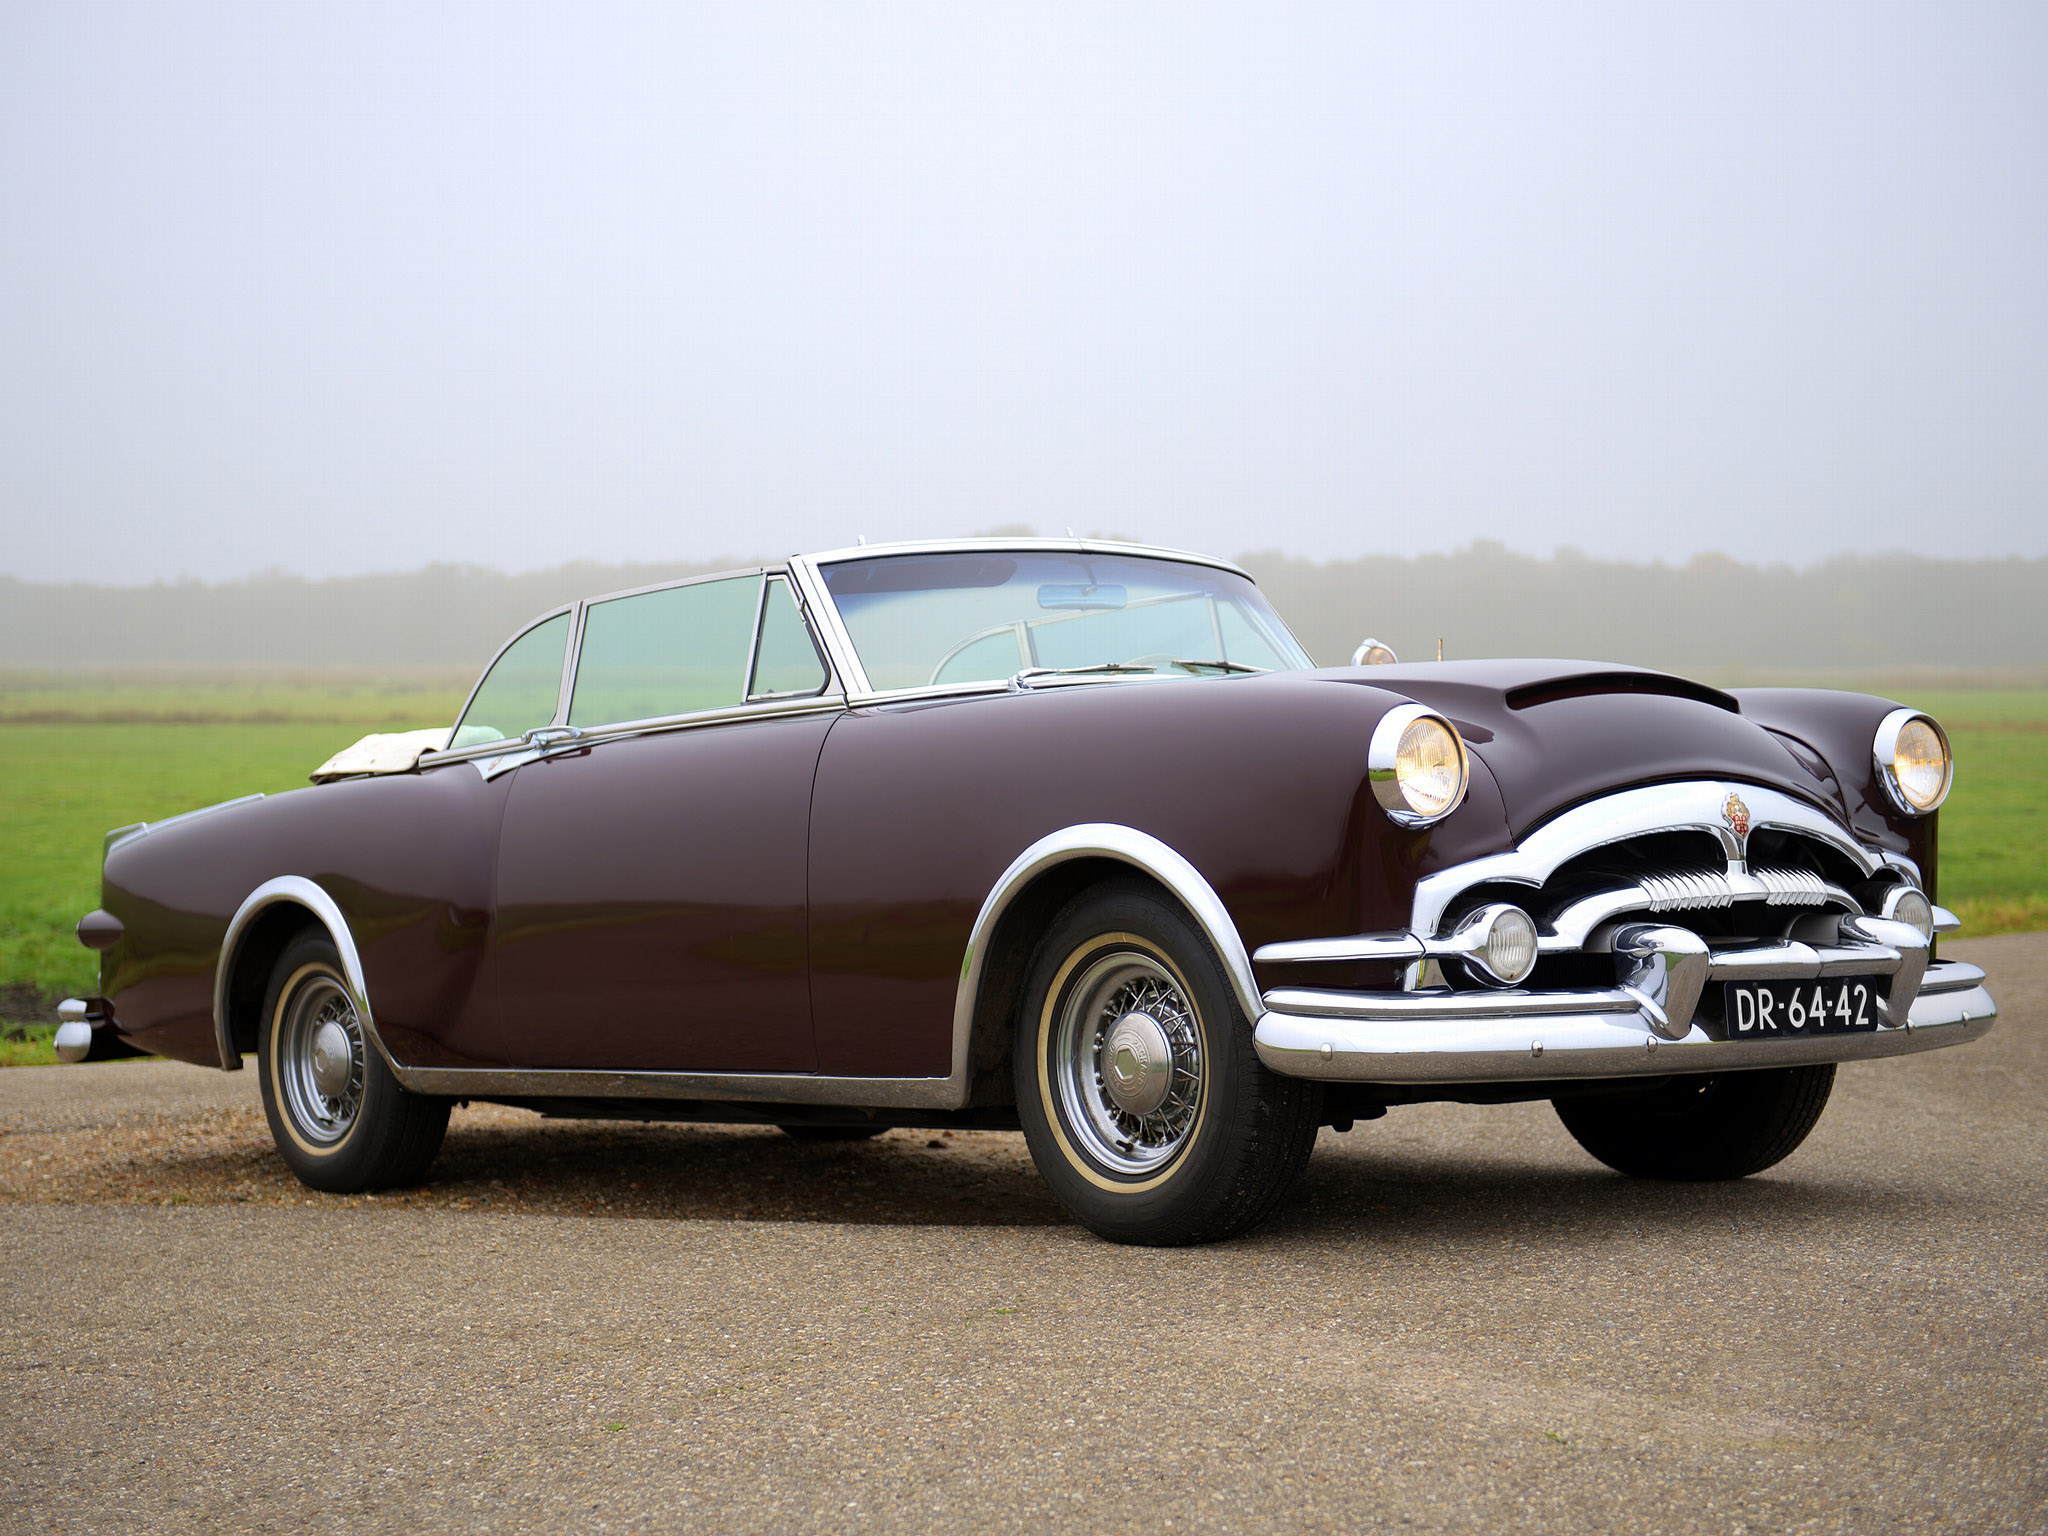 1953, Packard, Caribbean, Convertible, Coupe, Retro, Luxury, Fv Wallpaper